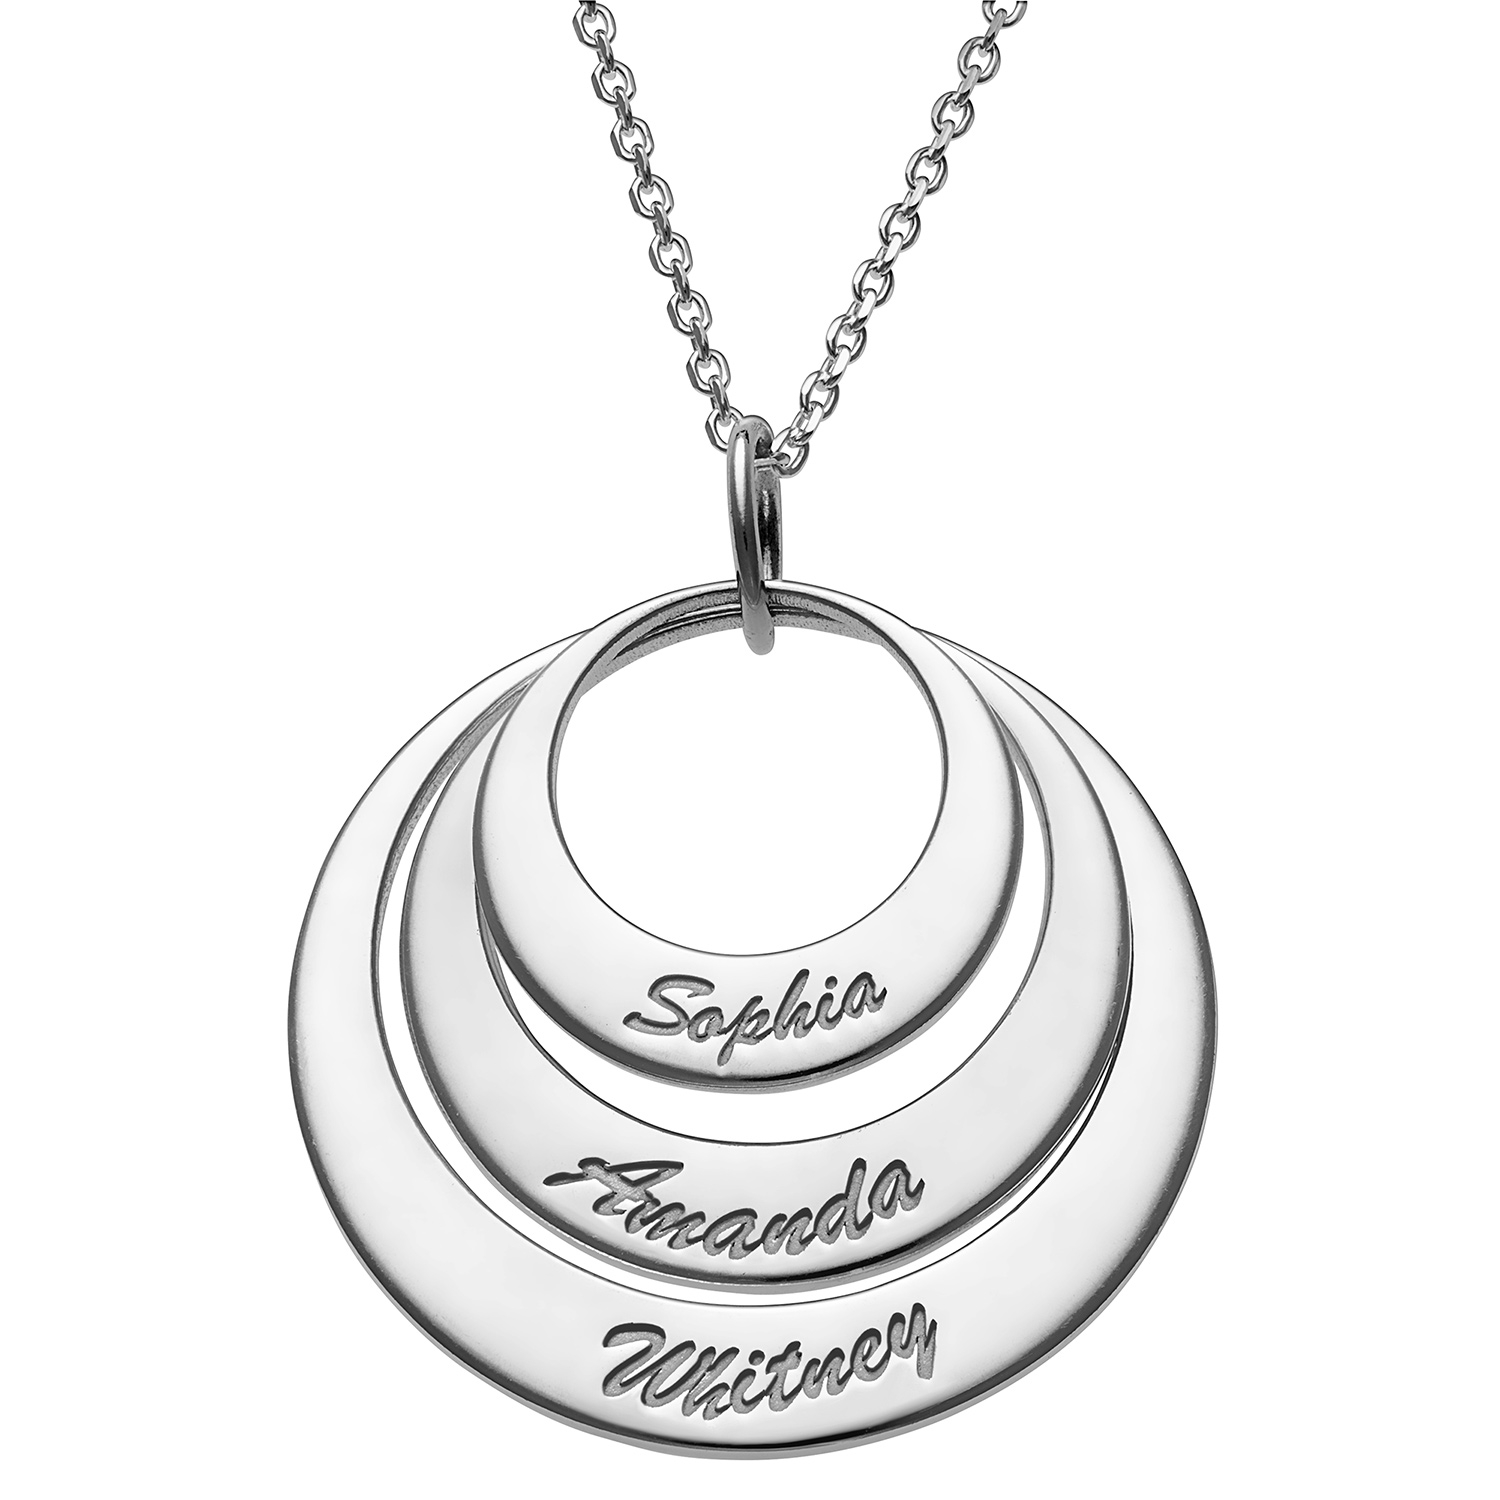 Nesting Circles with Names Necklace - 3 Discs